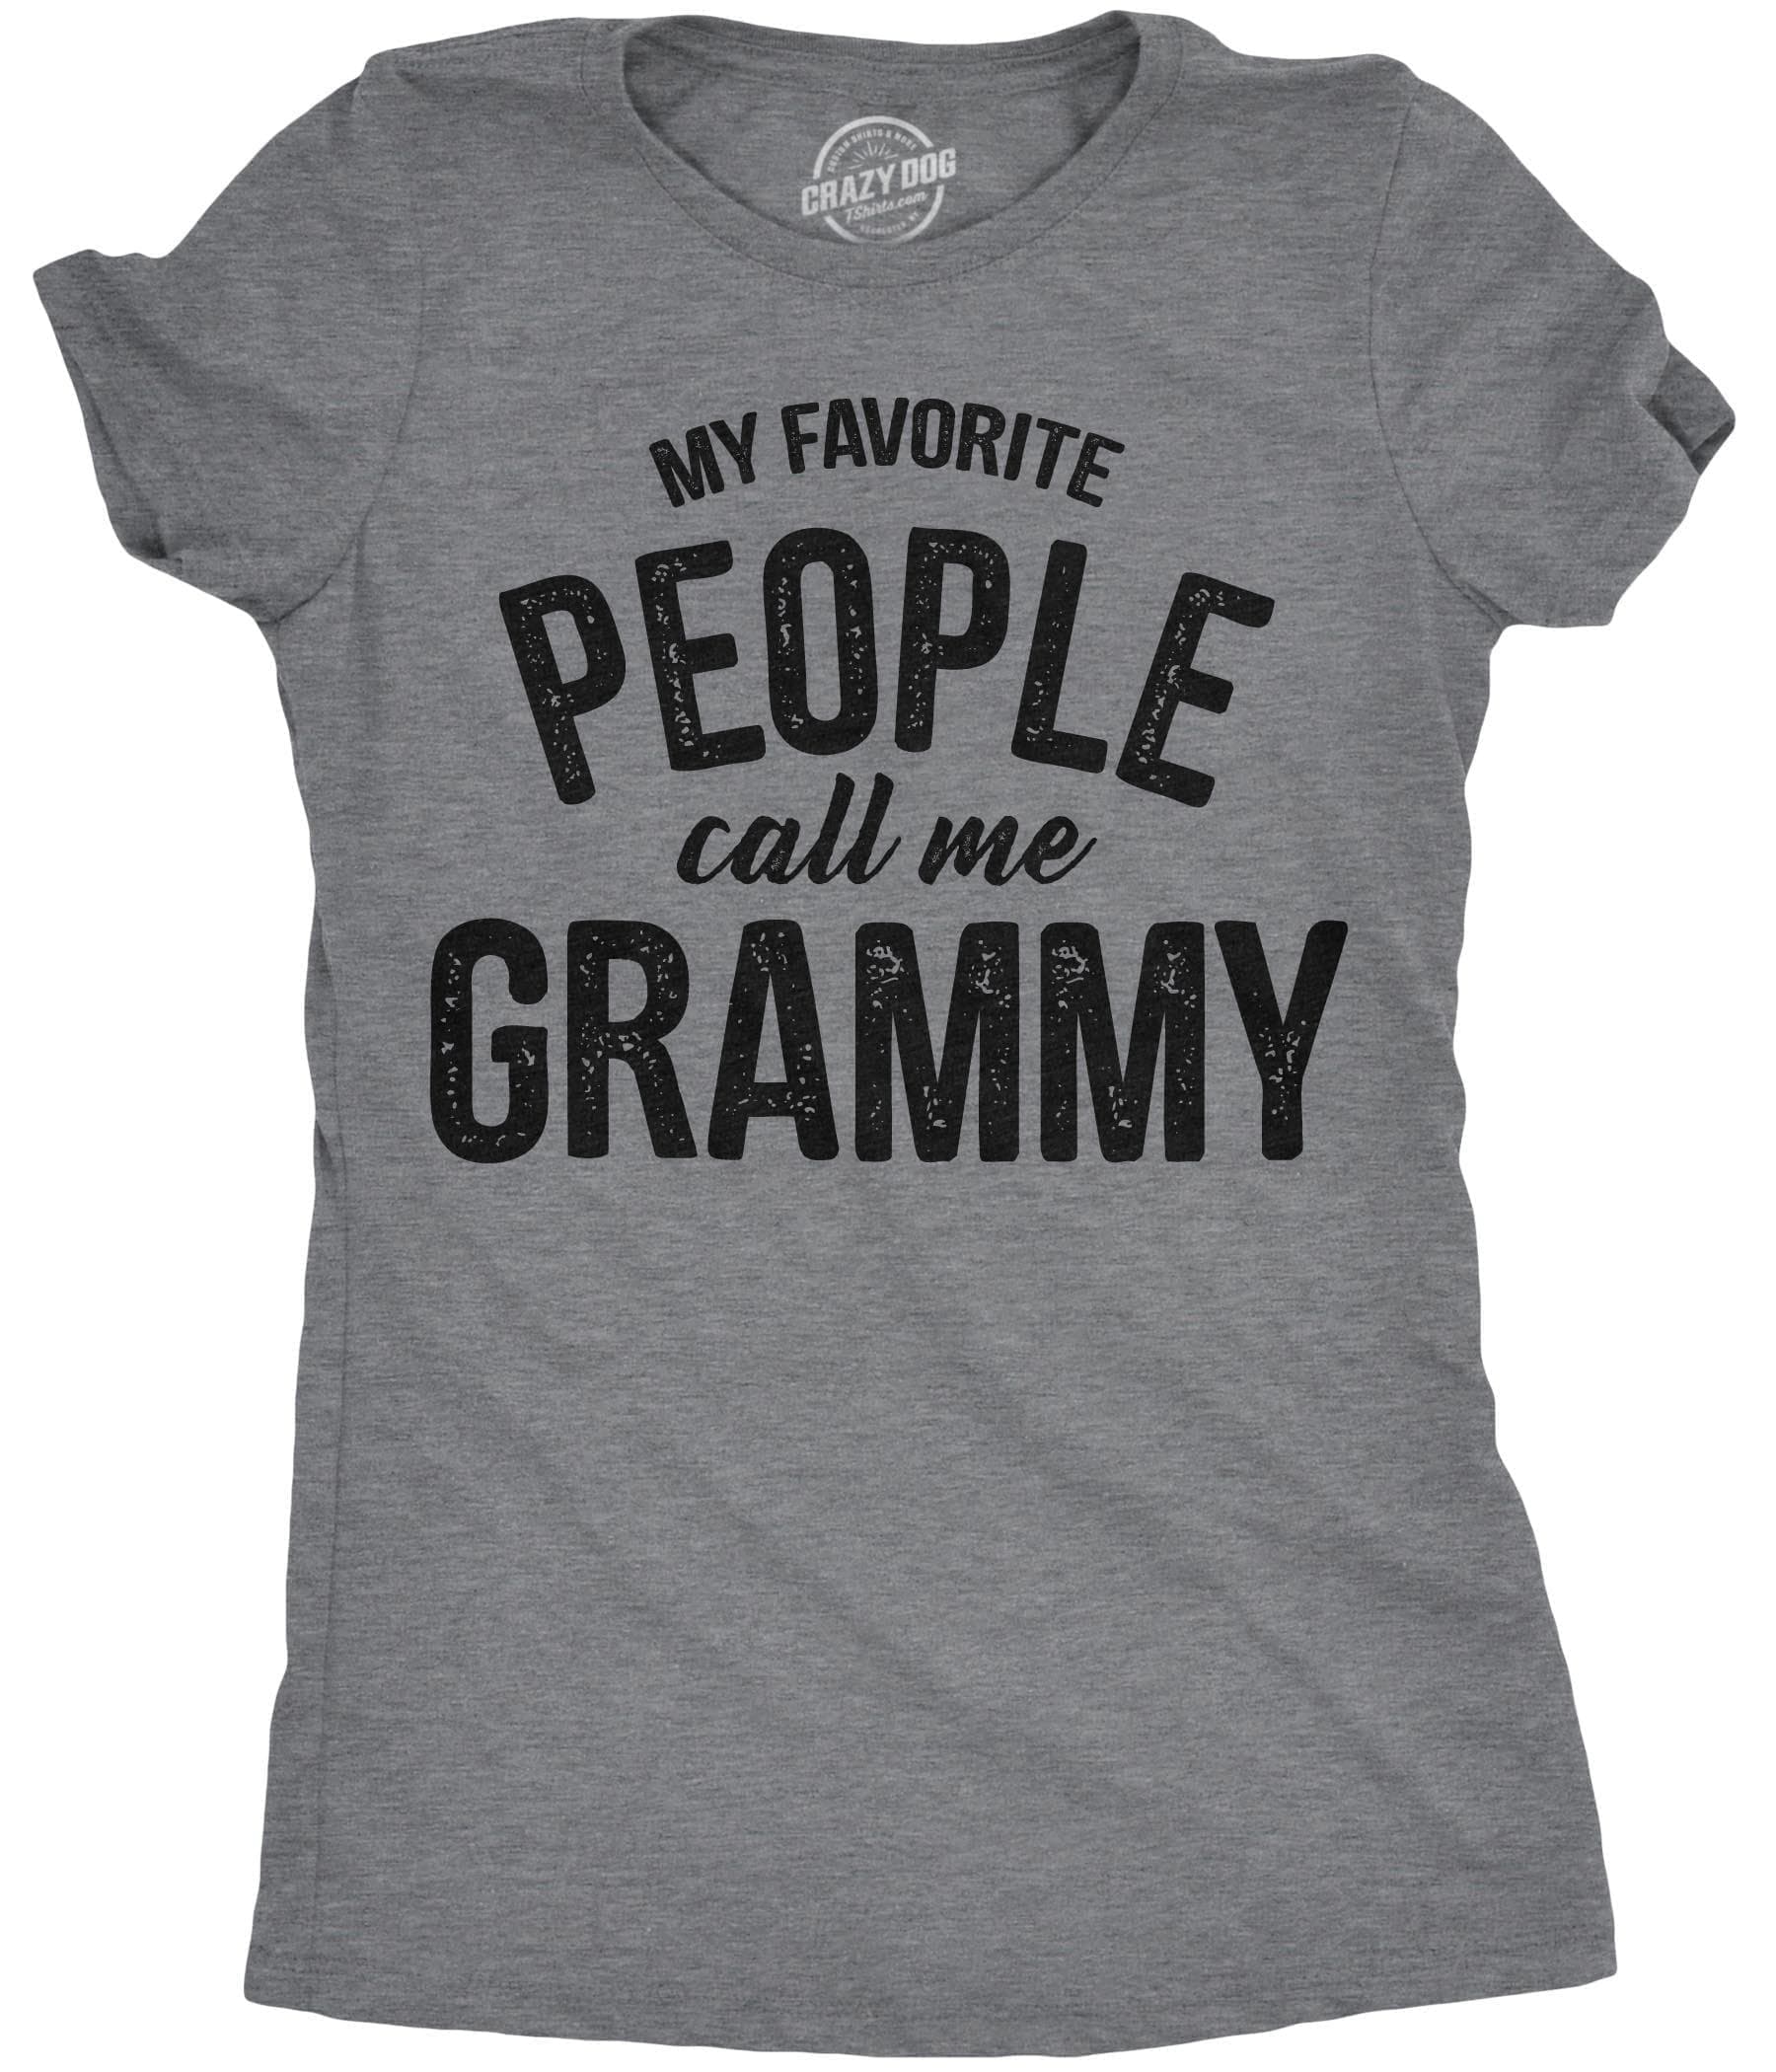 My Favorite People Call Me Grammy Women's Tshirt  -  Crazy Dog T-Shirts